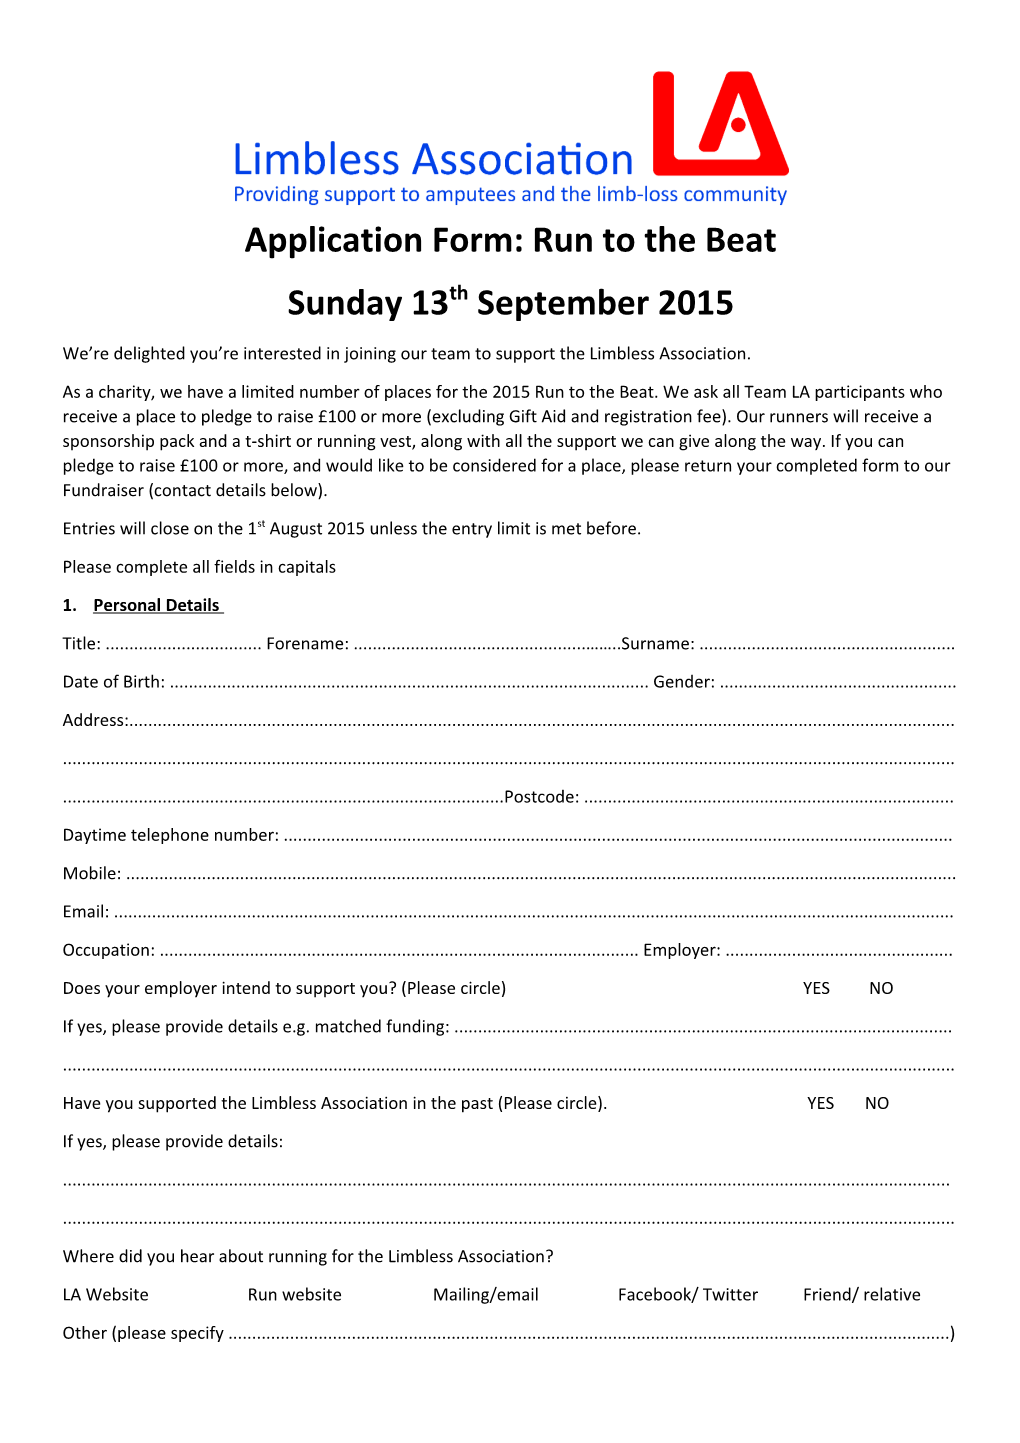 Application Form: Run to the Beat